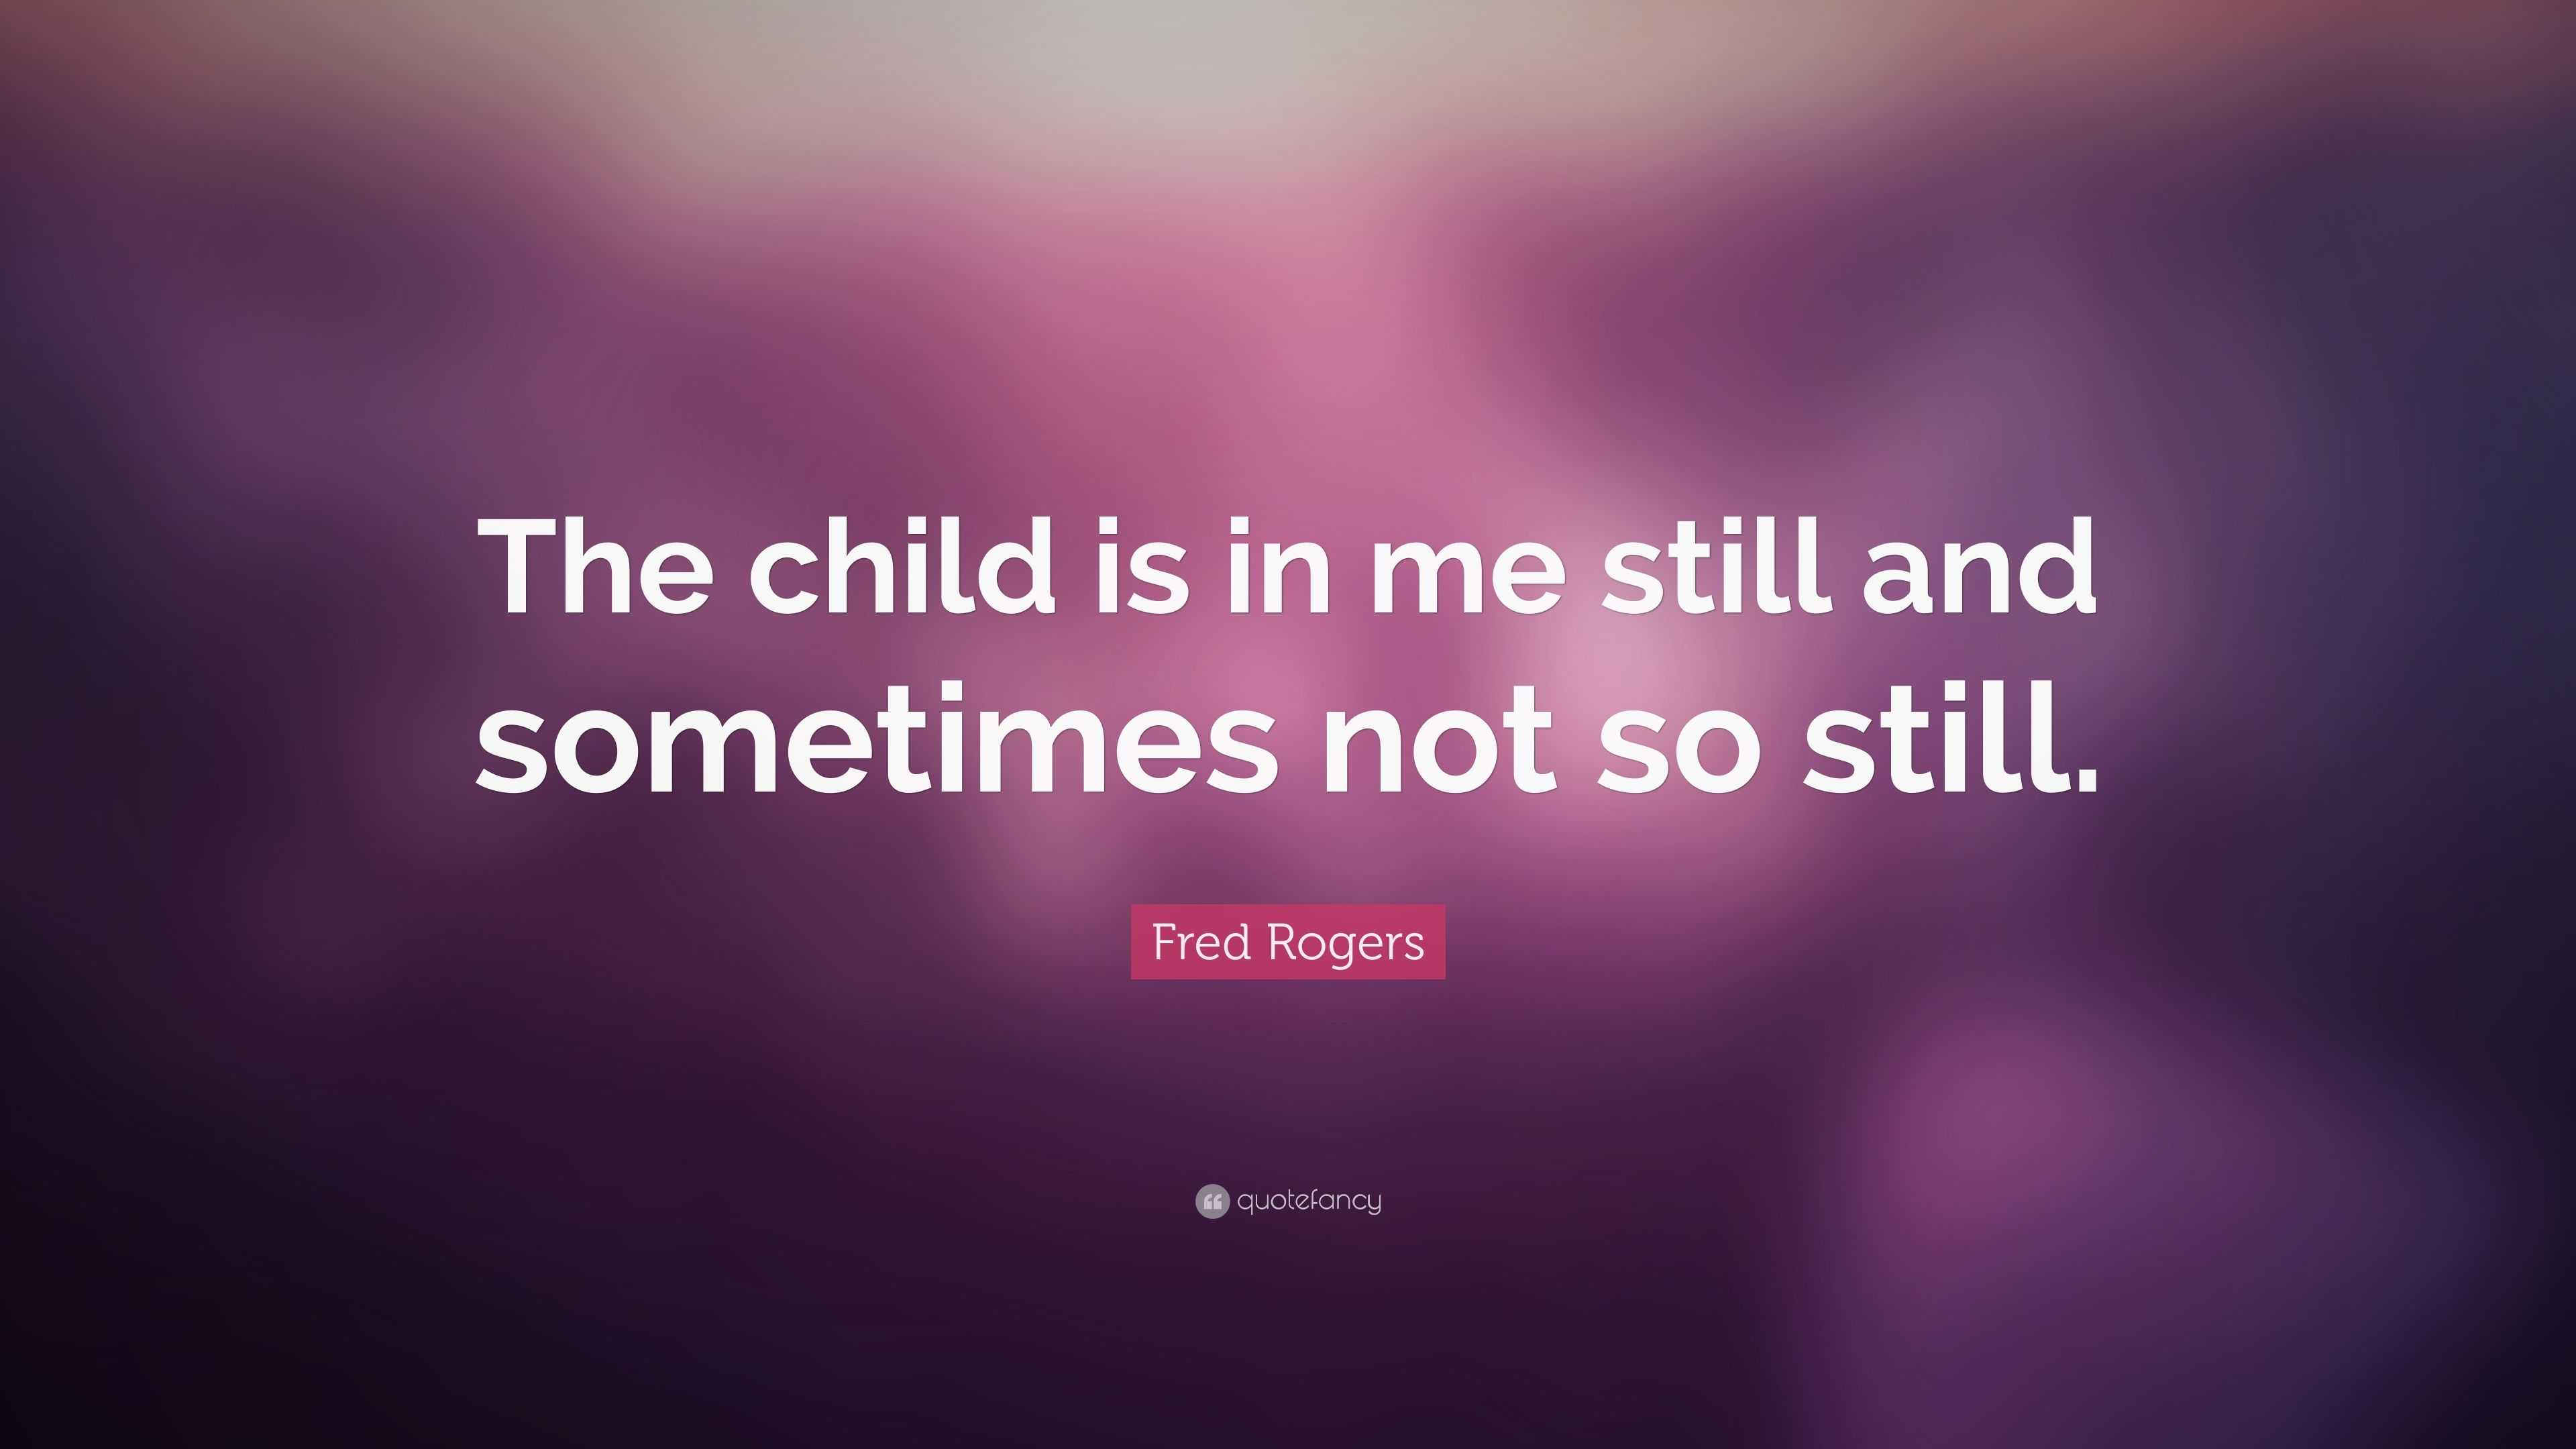 Fred Rogers Quote: “The child is in me still and sometimes not so still.”